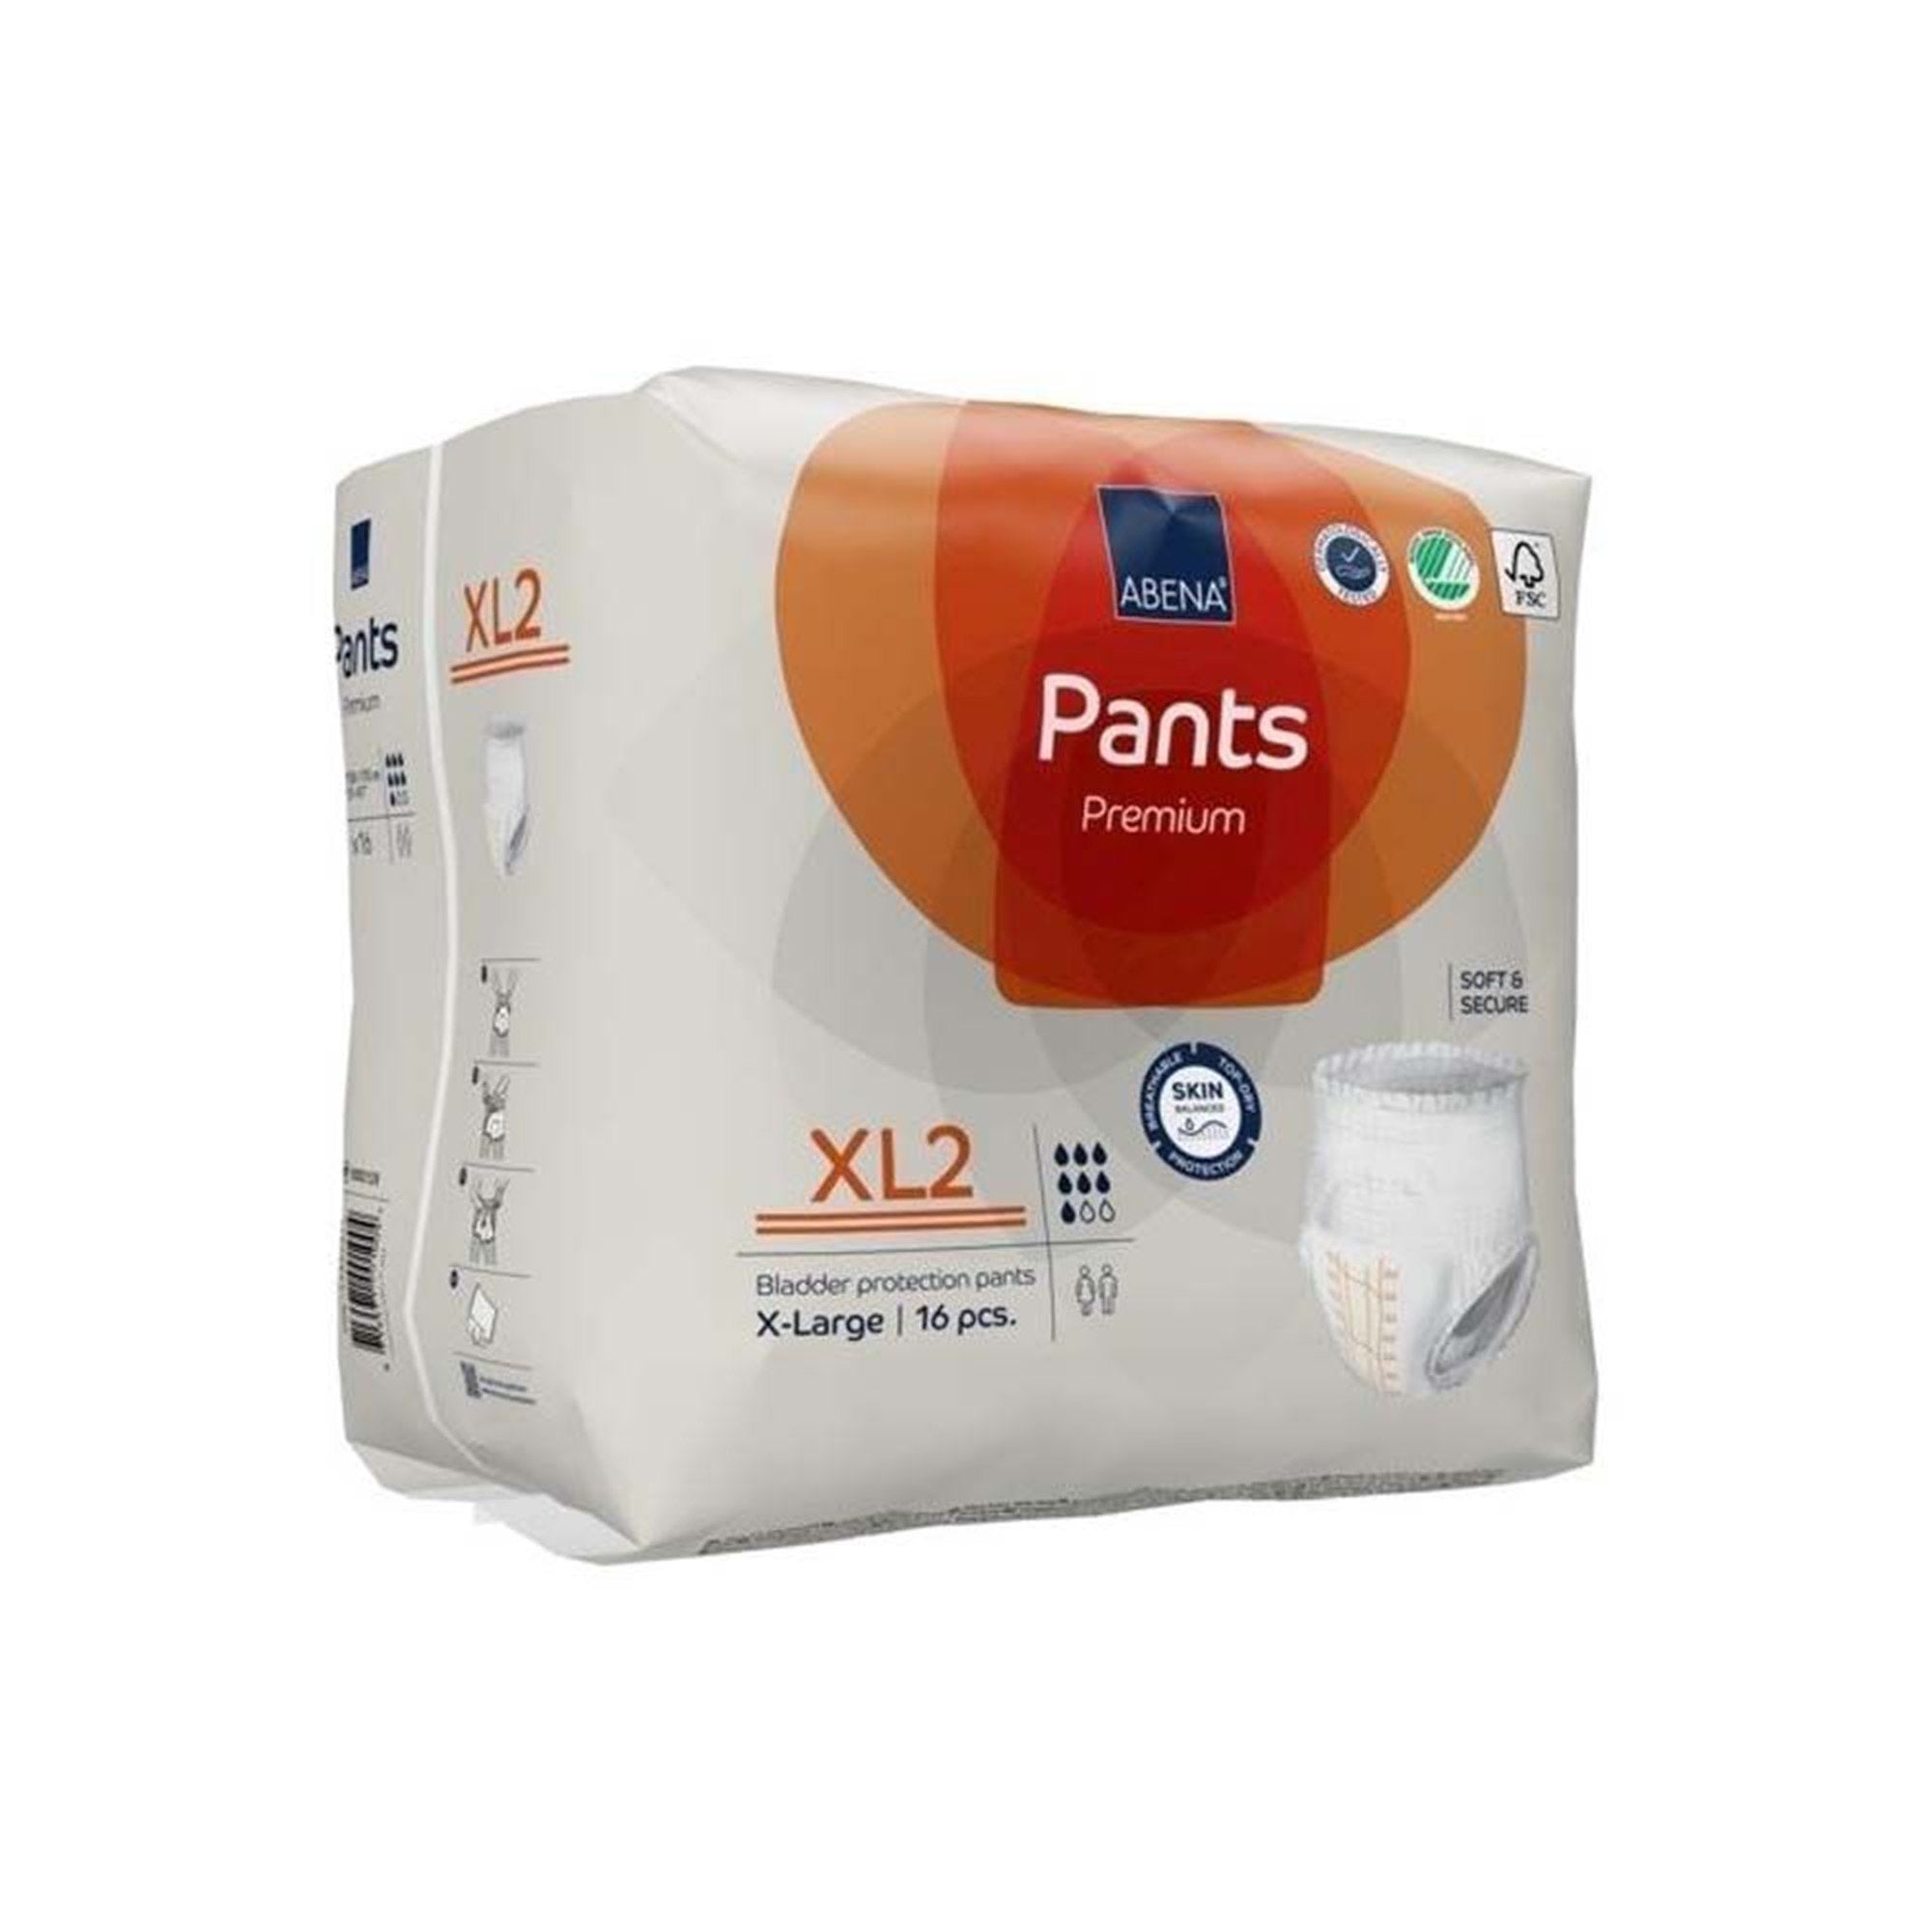 Unisex Adult Absorbent Underwear Abena Premium Pants XL2 Pull On with Tear Away Seams X-Large Disposable Moderate Absorbency